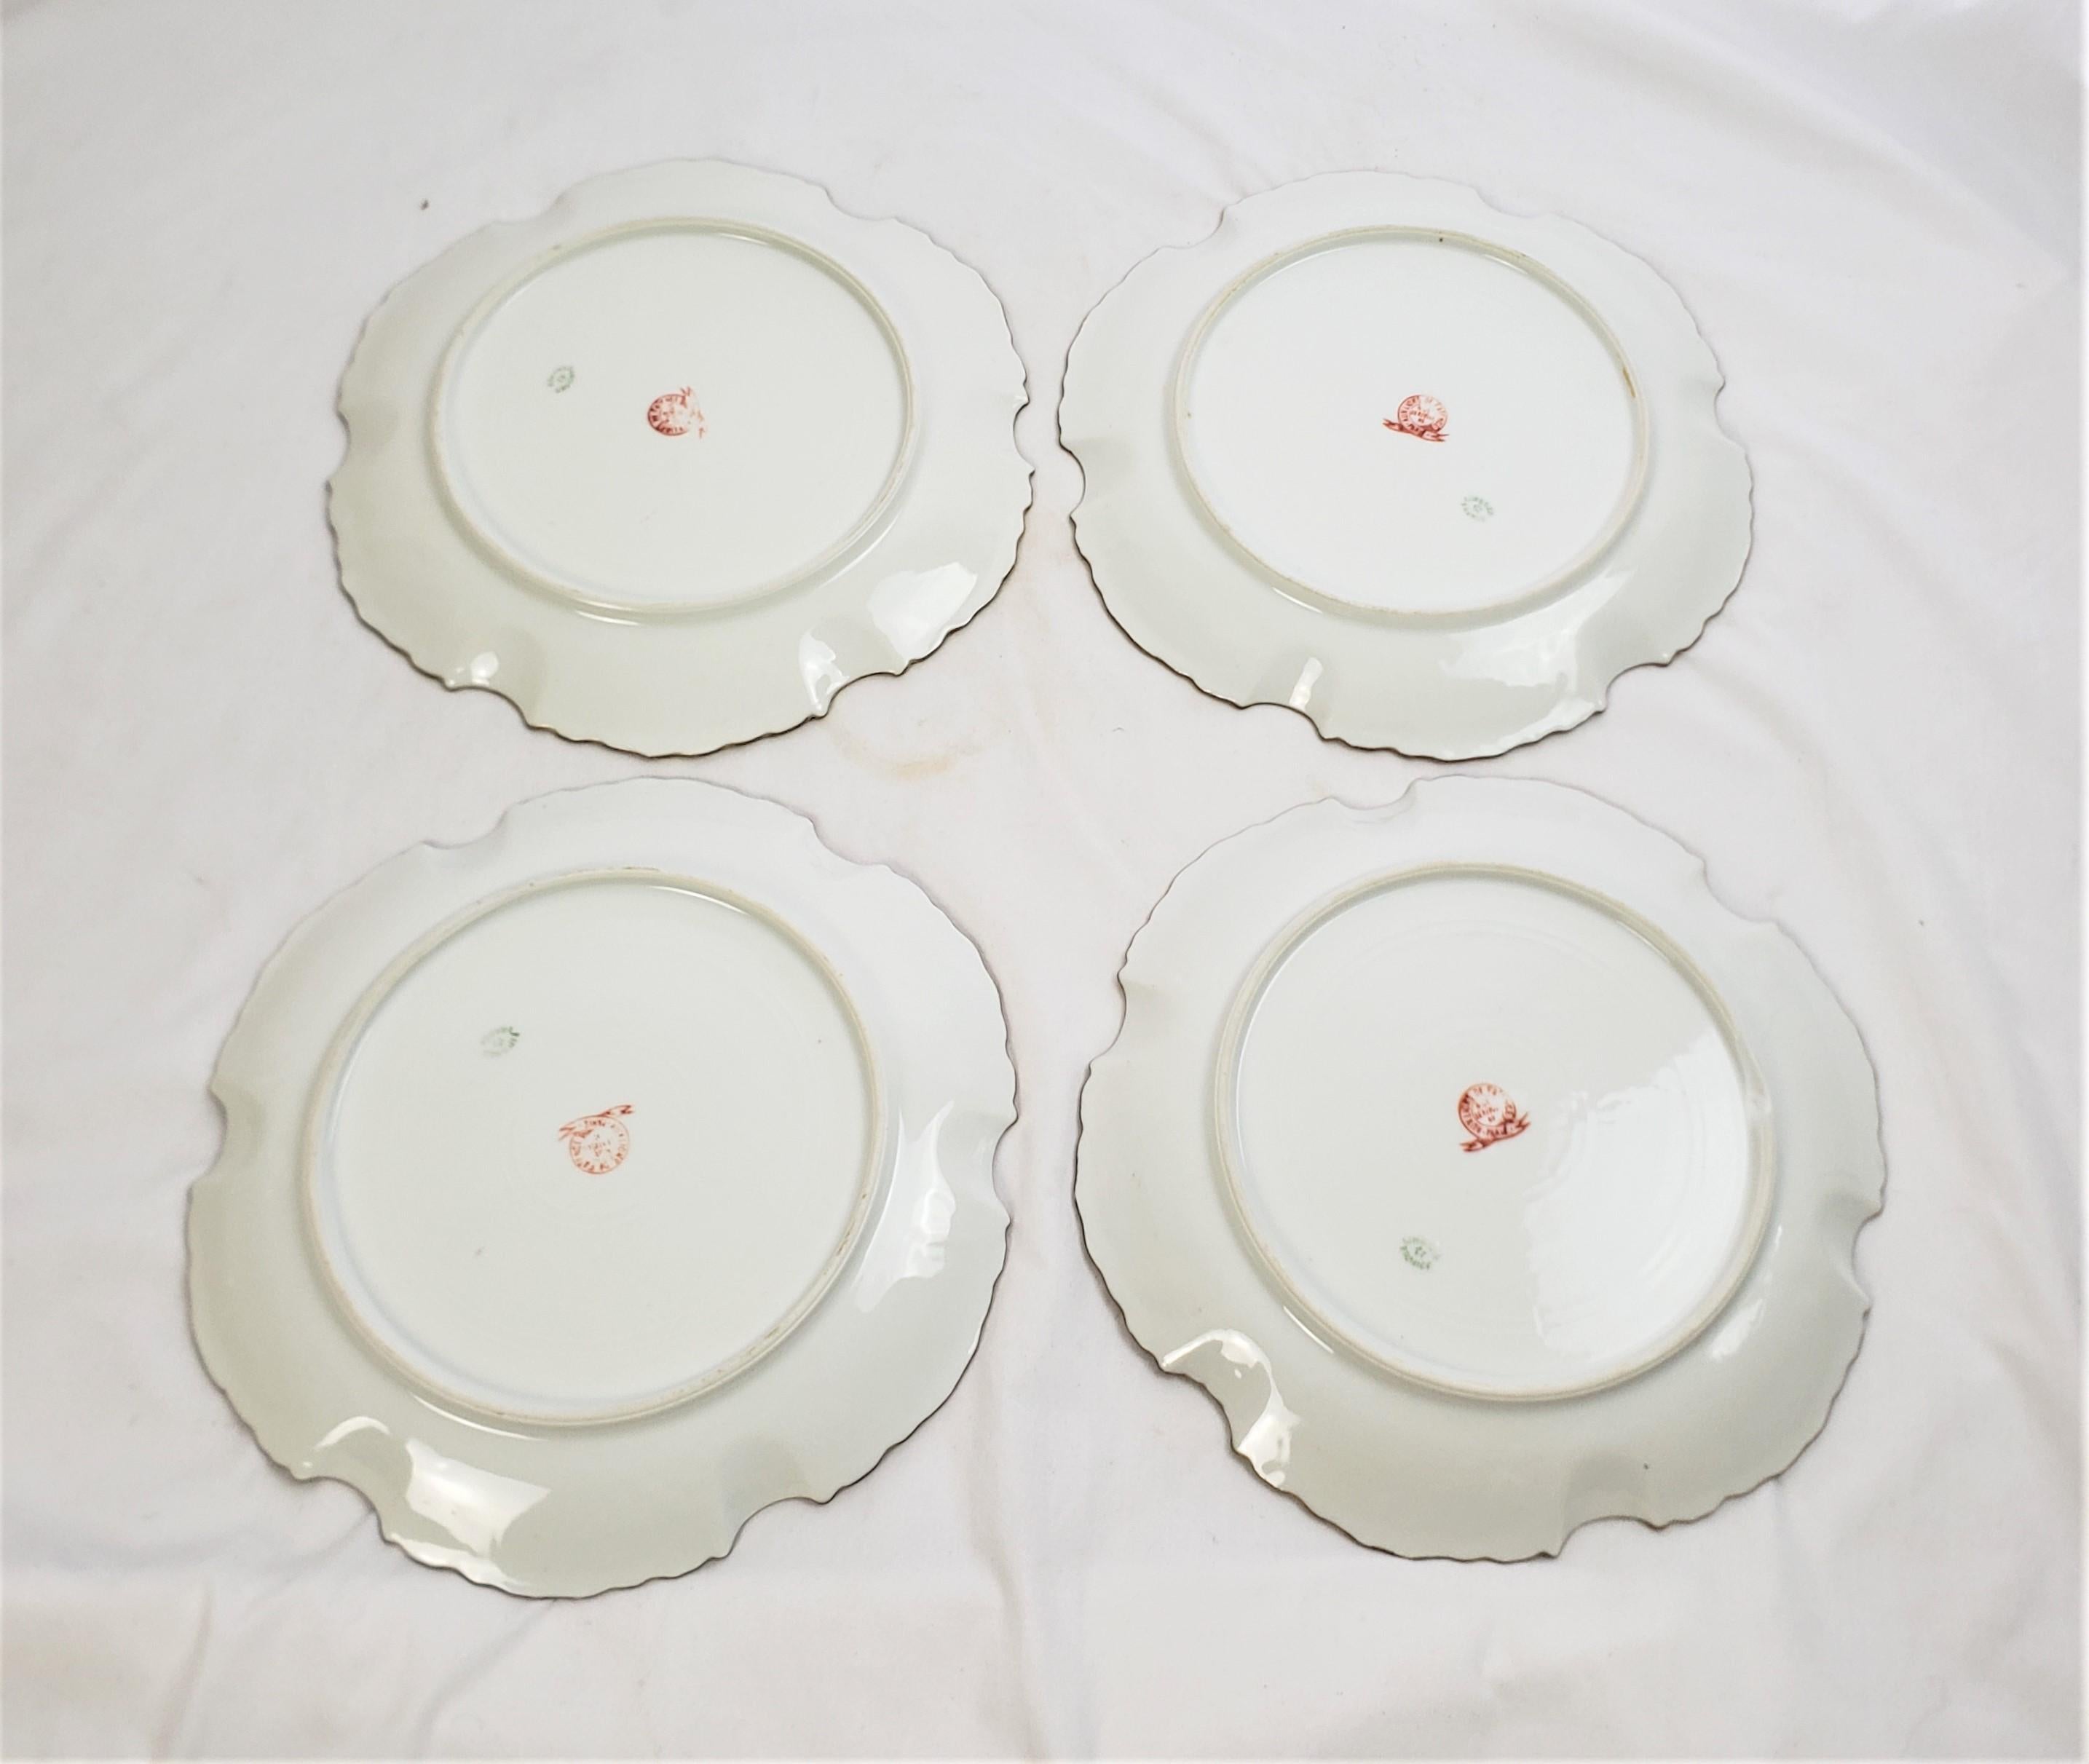 Porcelain Antique Limoges Hand-Painted Fish Set with Matching Platter & Sauce Boat For Sale